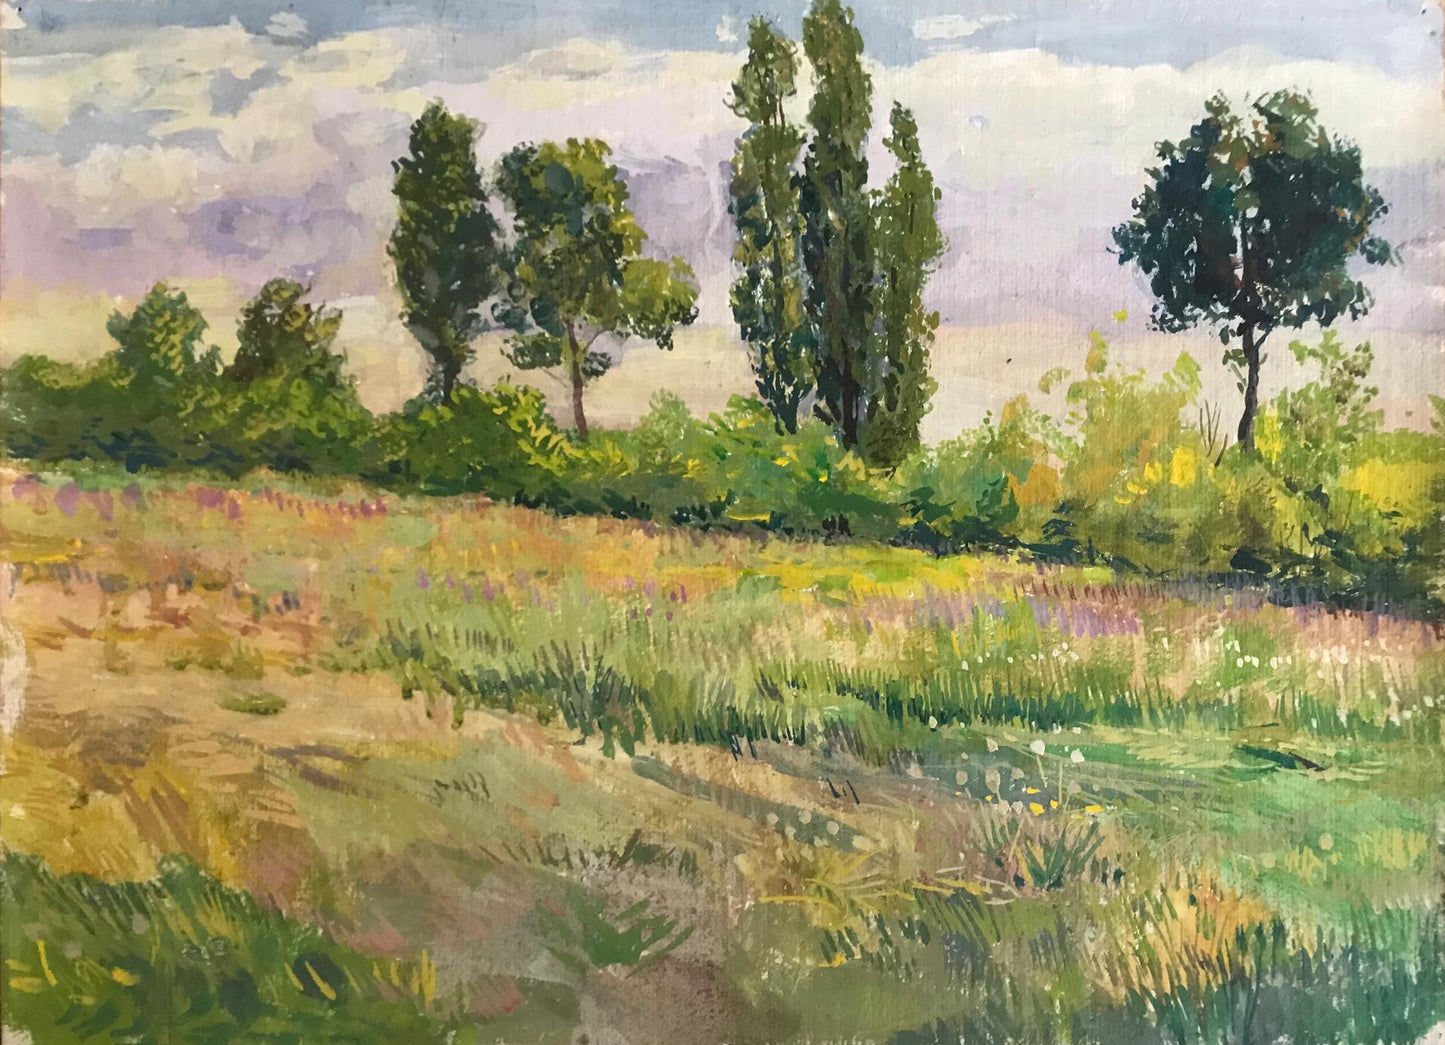 Tempera painting On the fields Wihyrovskii Victor